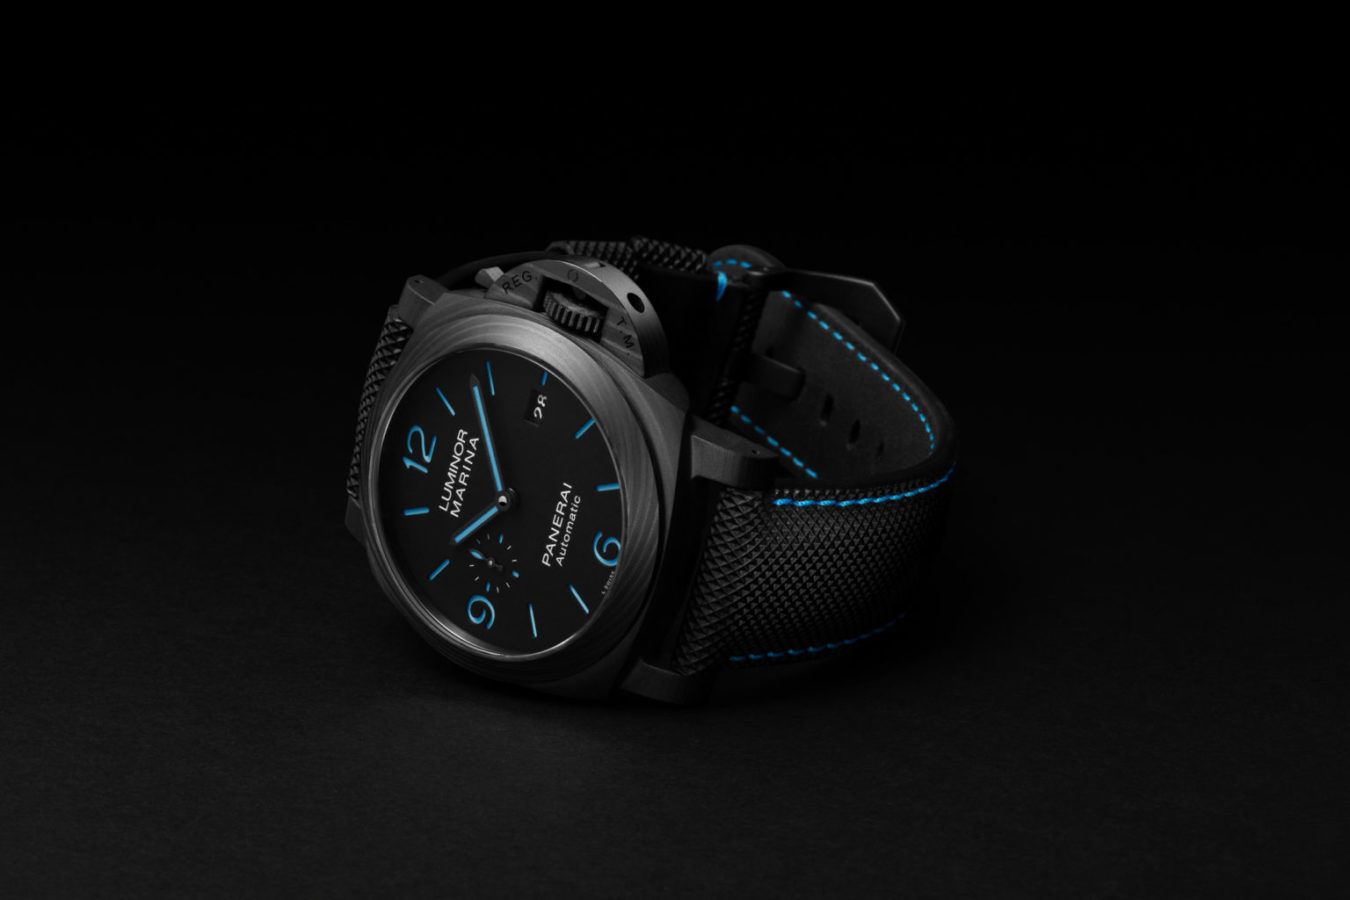 Panerai’s new Marina Carbotech sports watch weighs only 96 grams